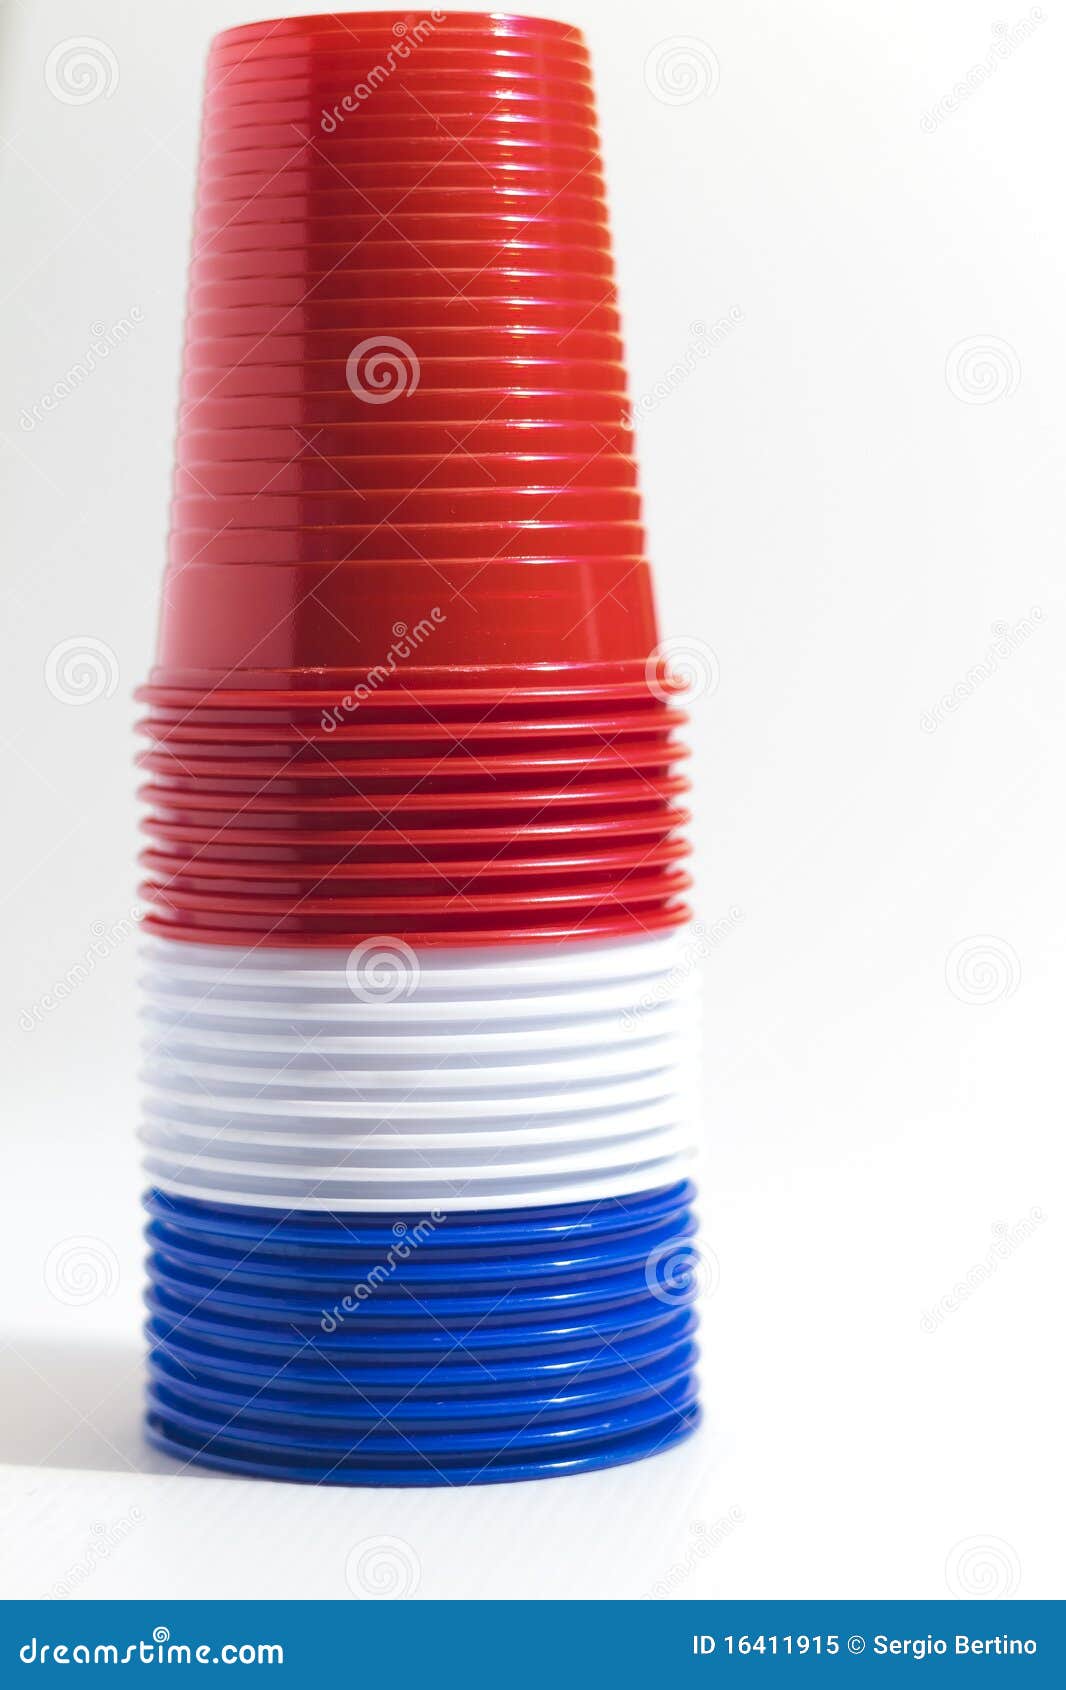 Red white and blue cups stock image. Image of supply - 16411915